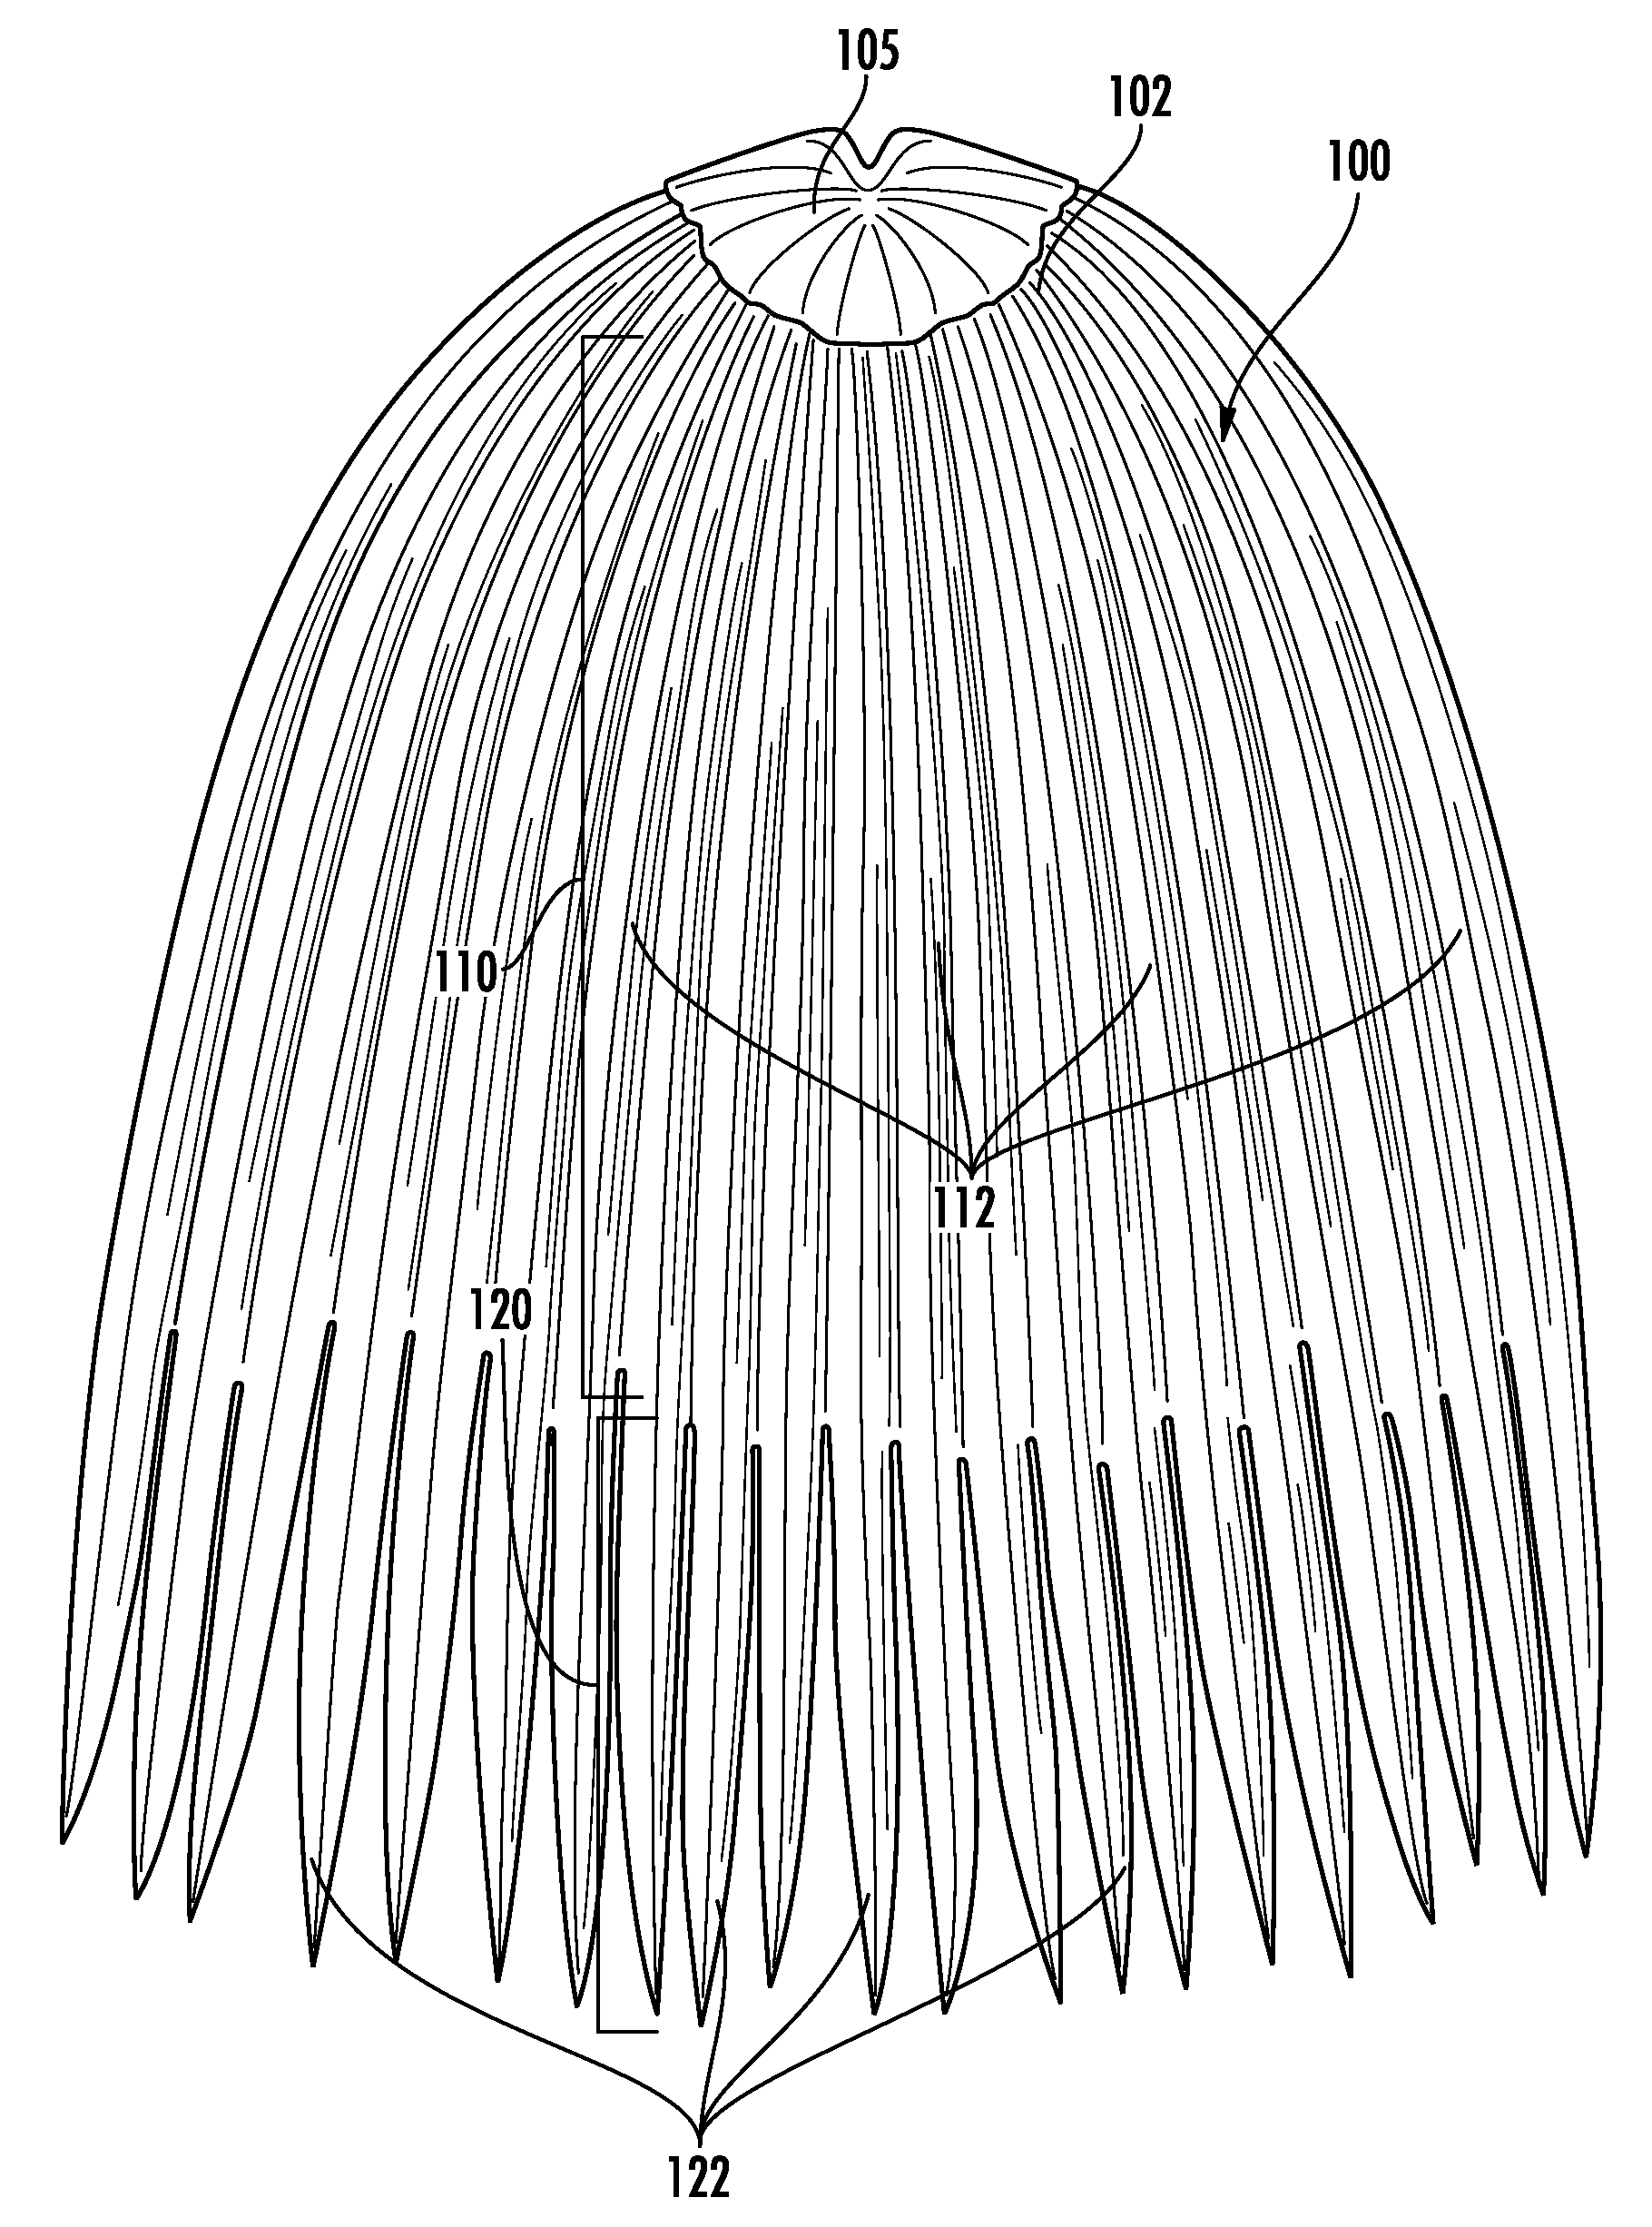 Synthetic thatch members for use as roofing material products and methods of making and using the same